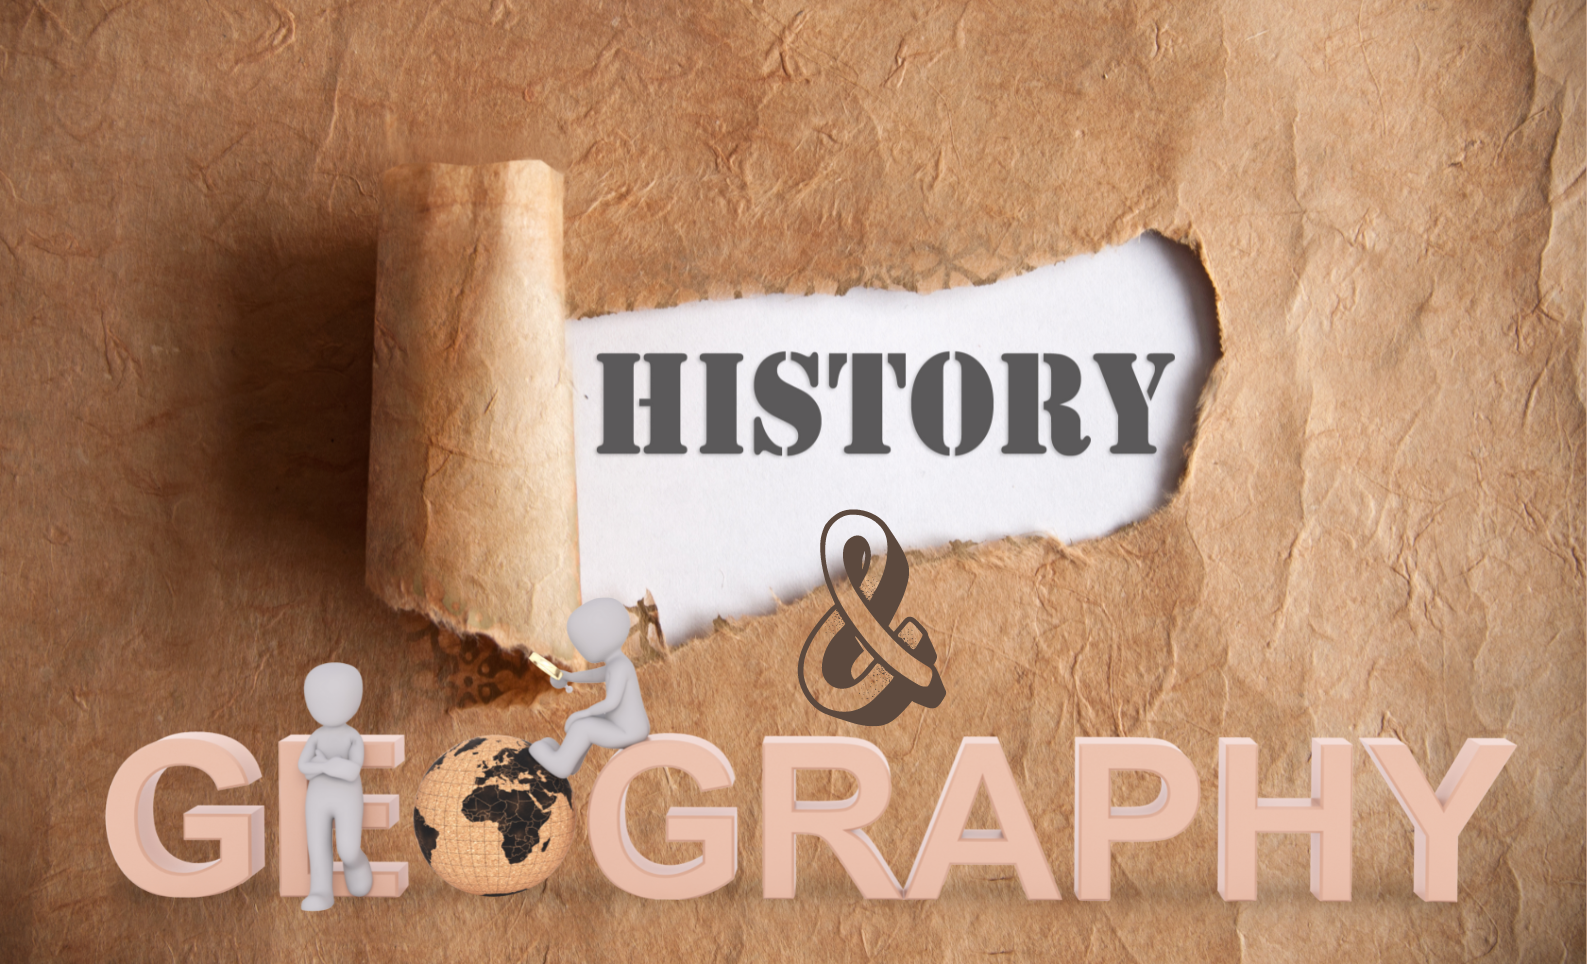 					View History & Geography
				